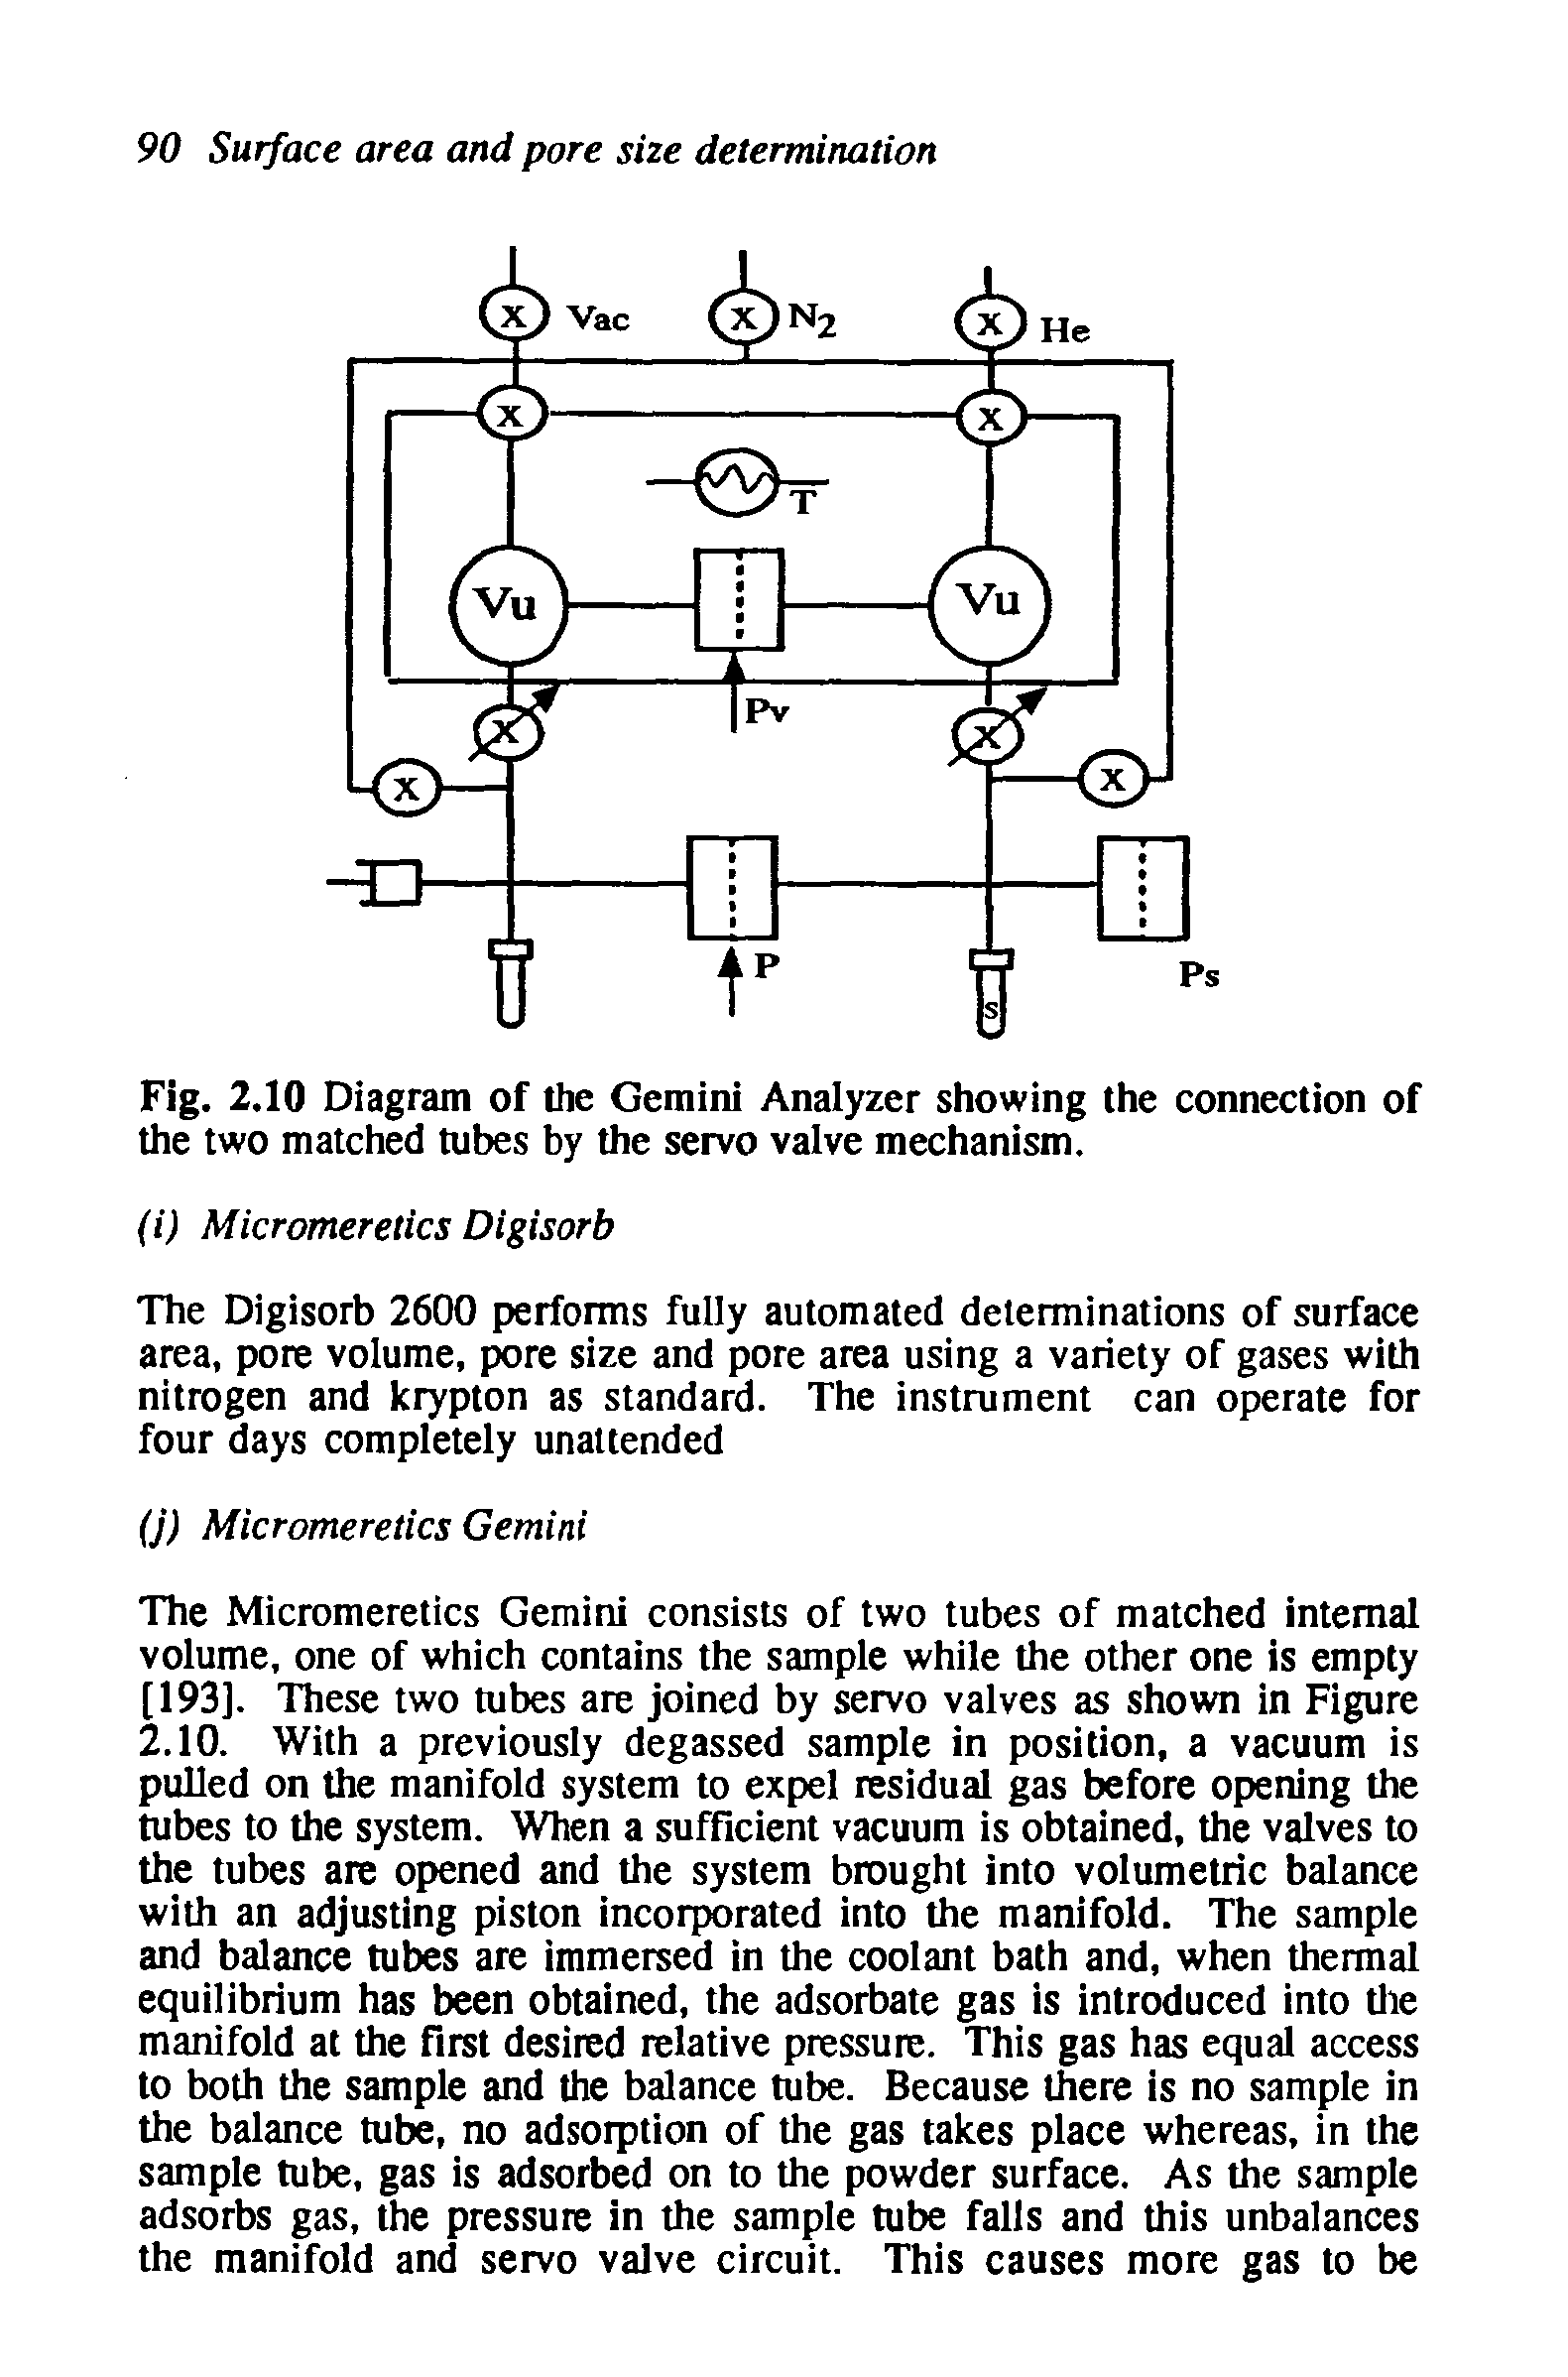 Fig. 2.10 Diagram of the Gemini Analyzer showing the connection of the two matched tubes by the servo valve mechanism.